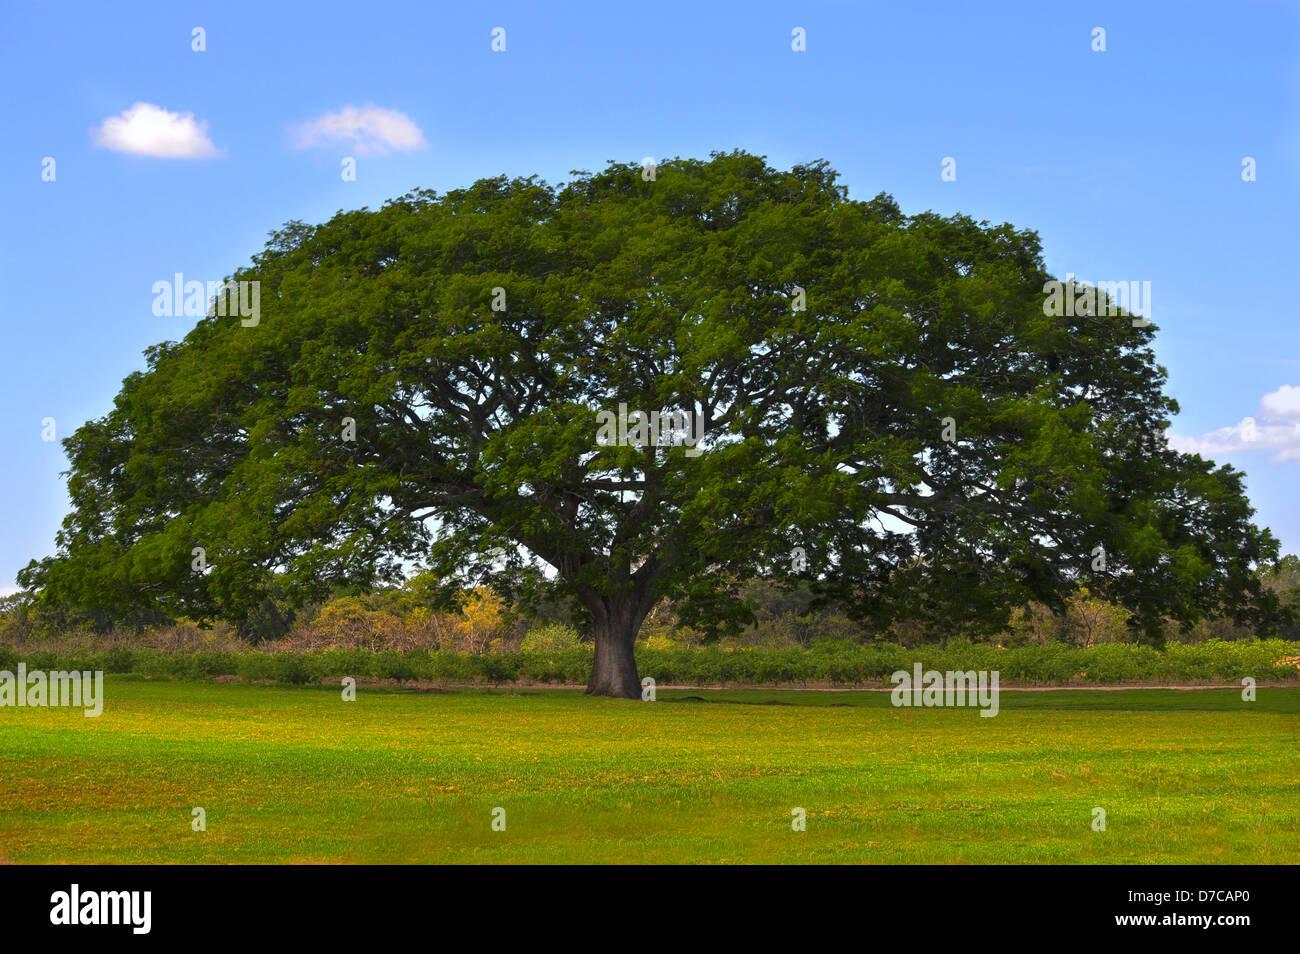 Huge tree in the middle of a green field with a blue sky Stock Photo